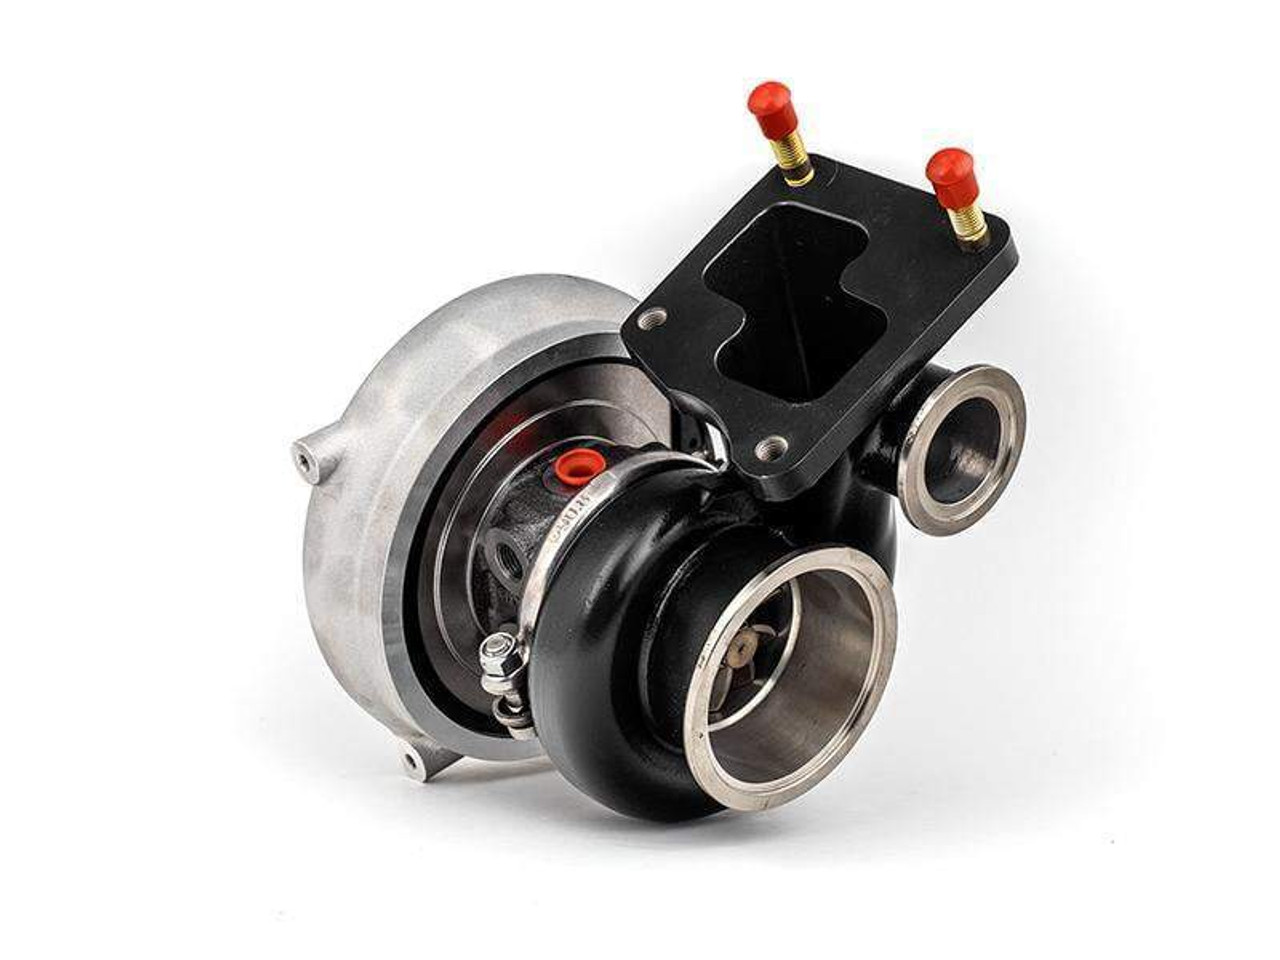 Forced Performance GREEN Turbocharger for Evolution IX